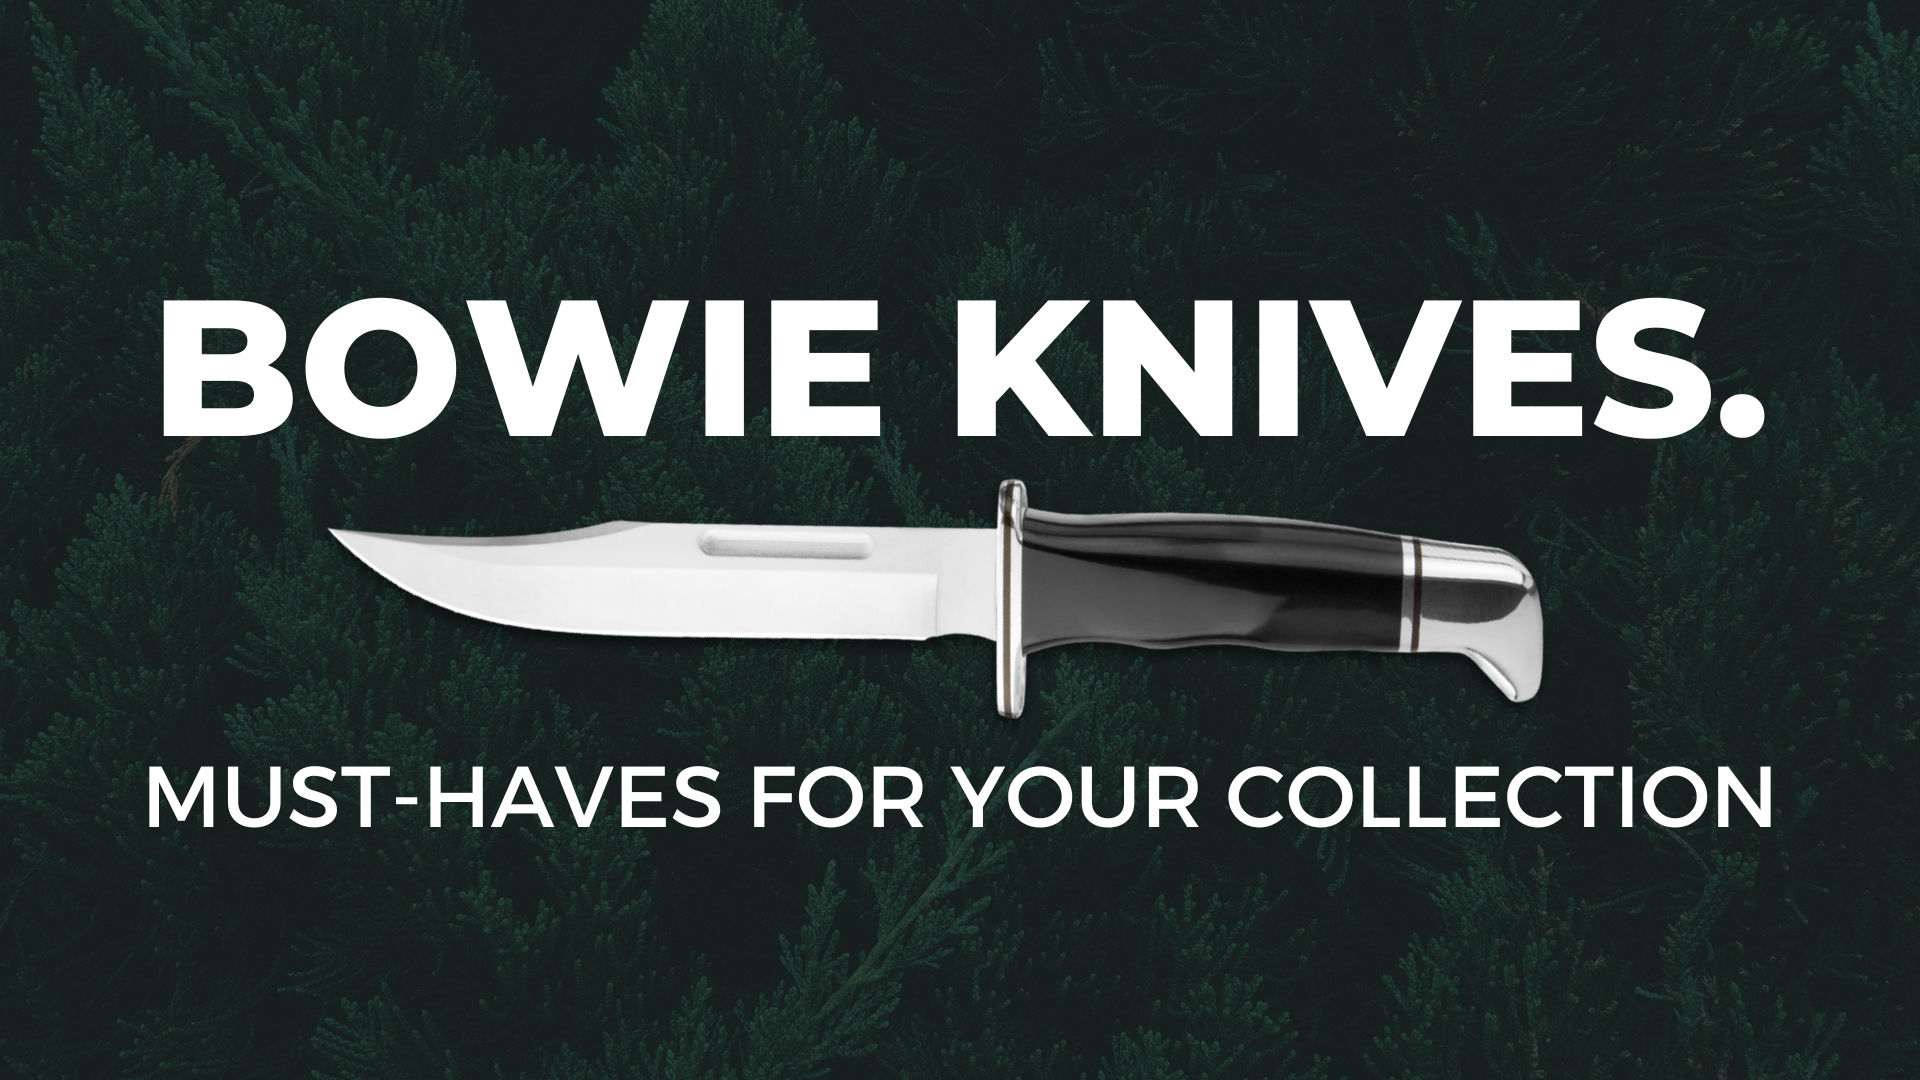 Text: Bowie Knives must-haves for your collection